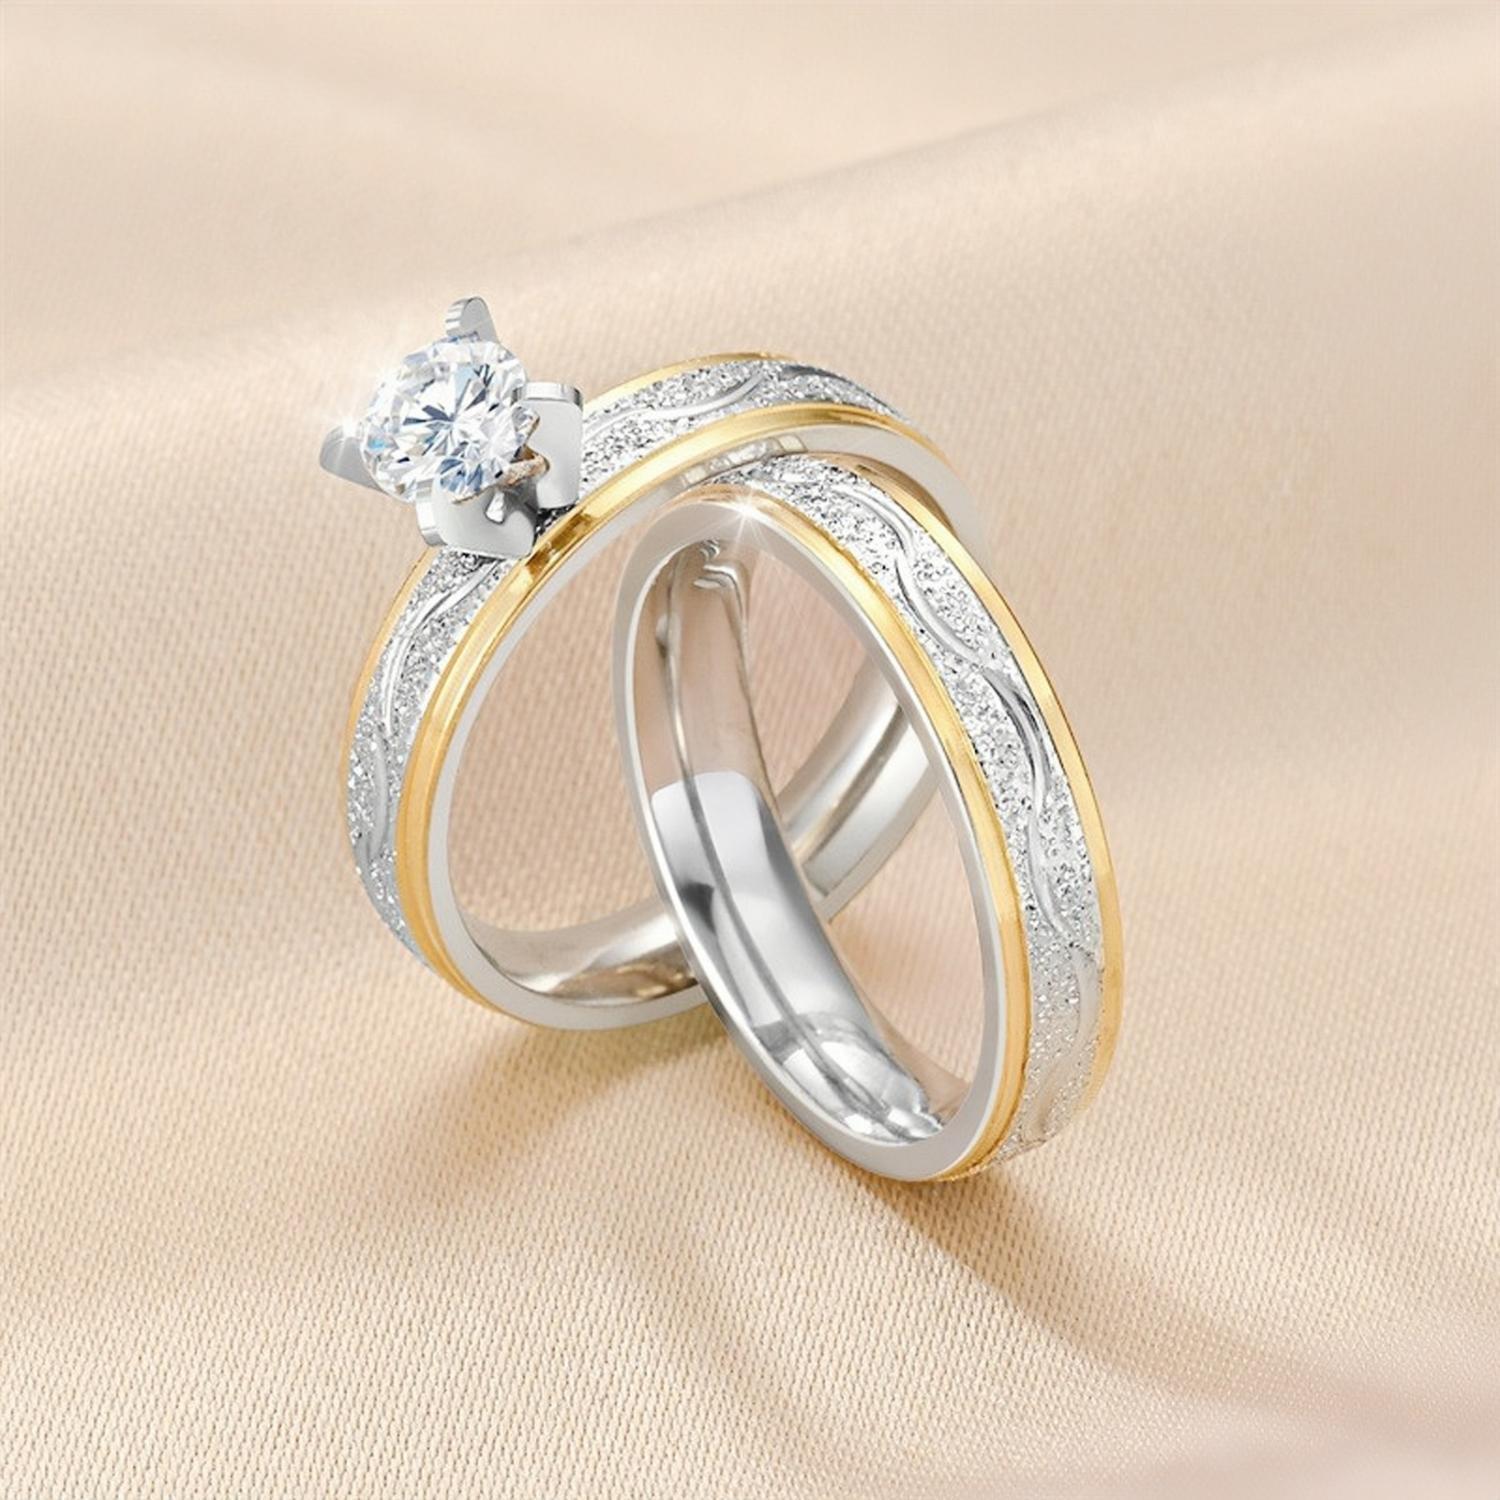 Yellow And Silver Two-Tone Solitaire Couple Rings In Titanium - CoupleSets